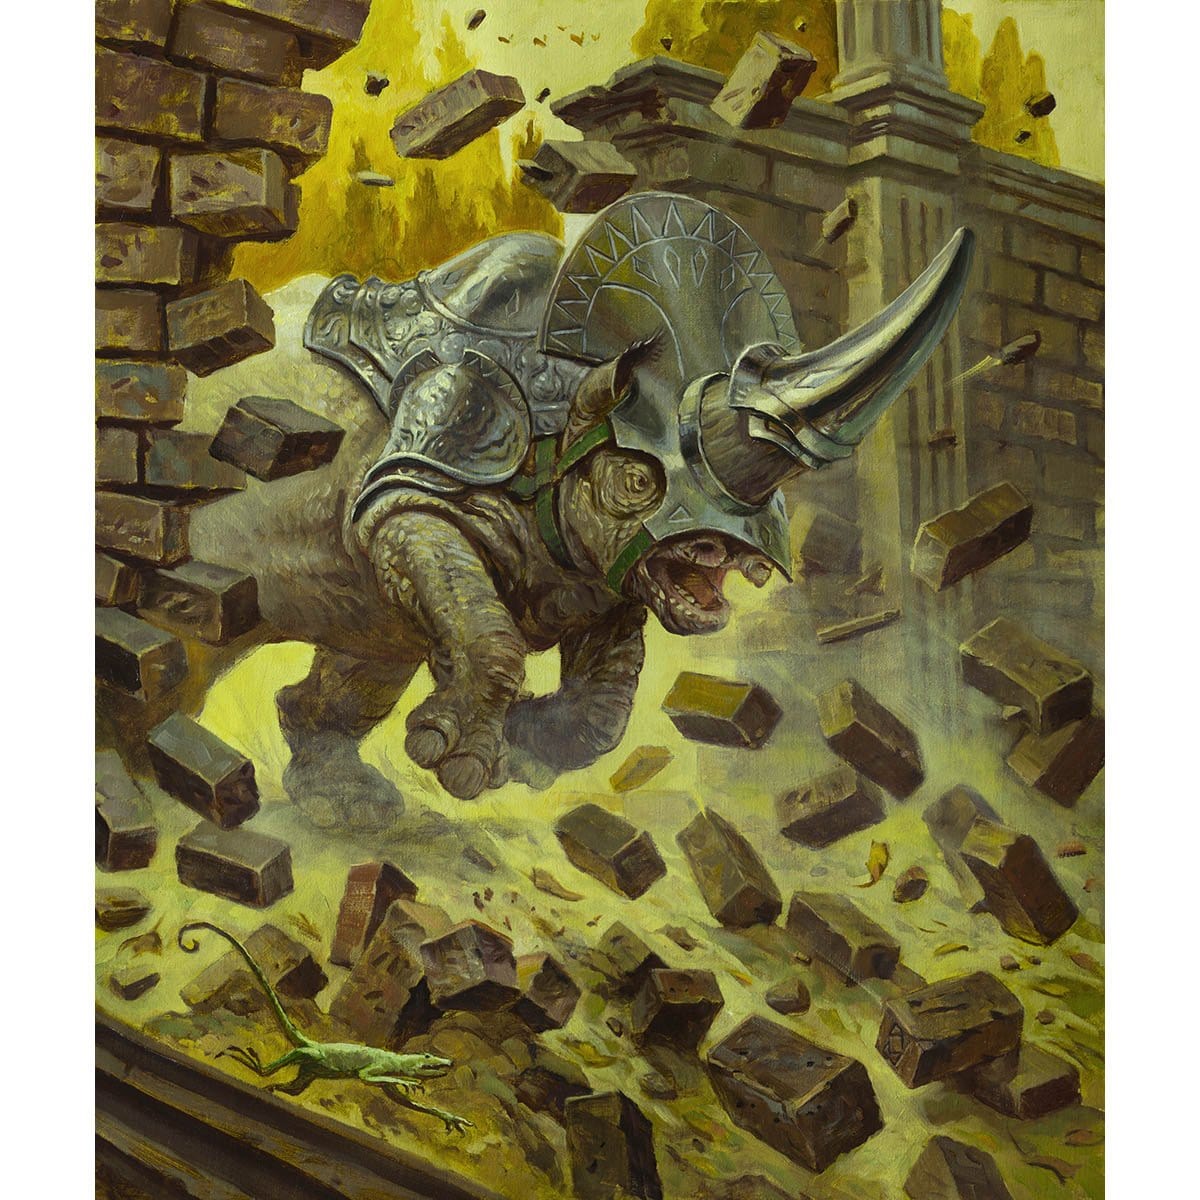 Rhino Token Print - Print - Original Magic Art - Accessories for Magic the Gathering and other card games